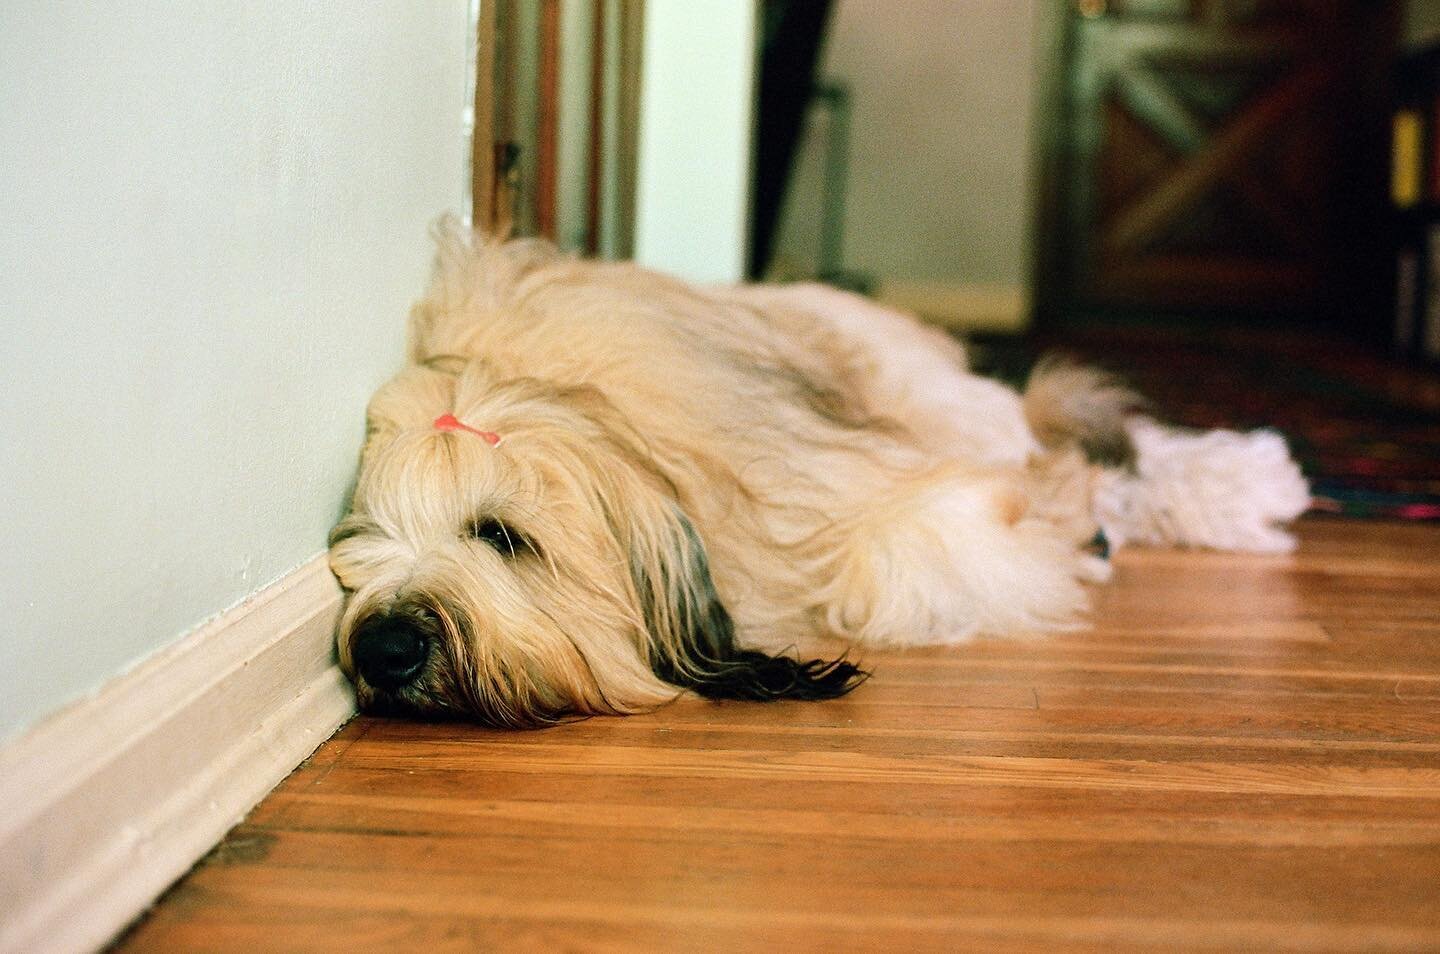 Why would you sleep on your comfy dog bed when you can sleep on the hardwood up against the wall?